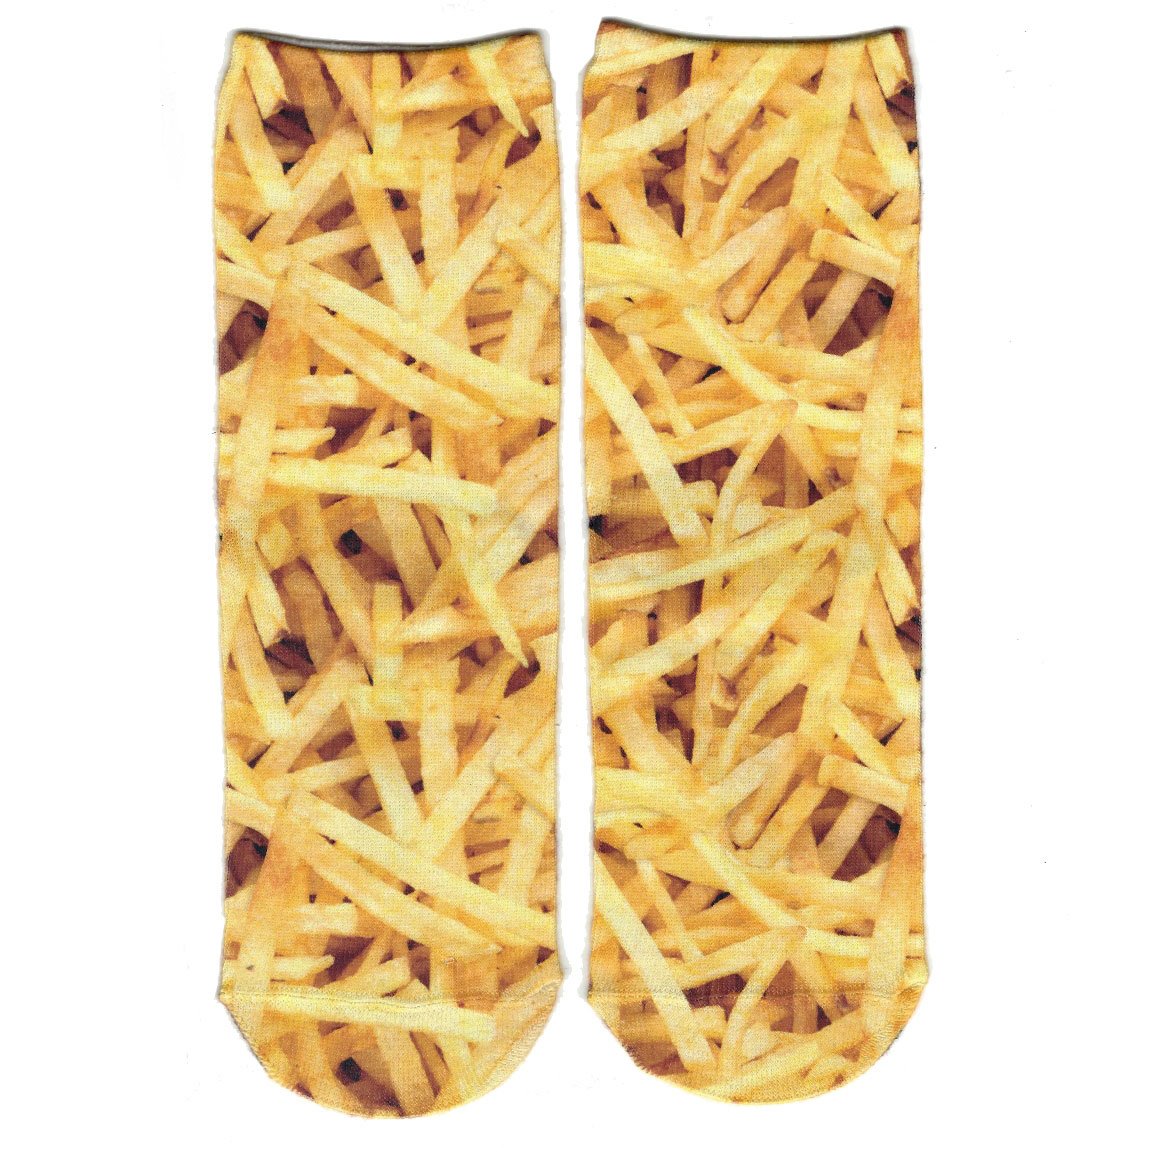 Boys French Fries Crew Socks by Sublime Designs - The Boy's Store